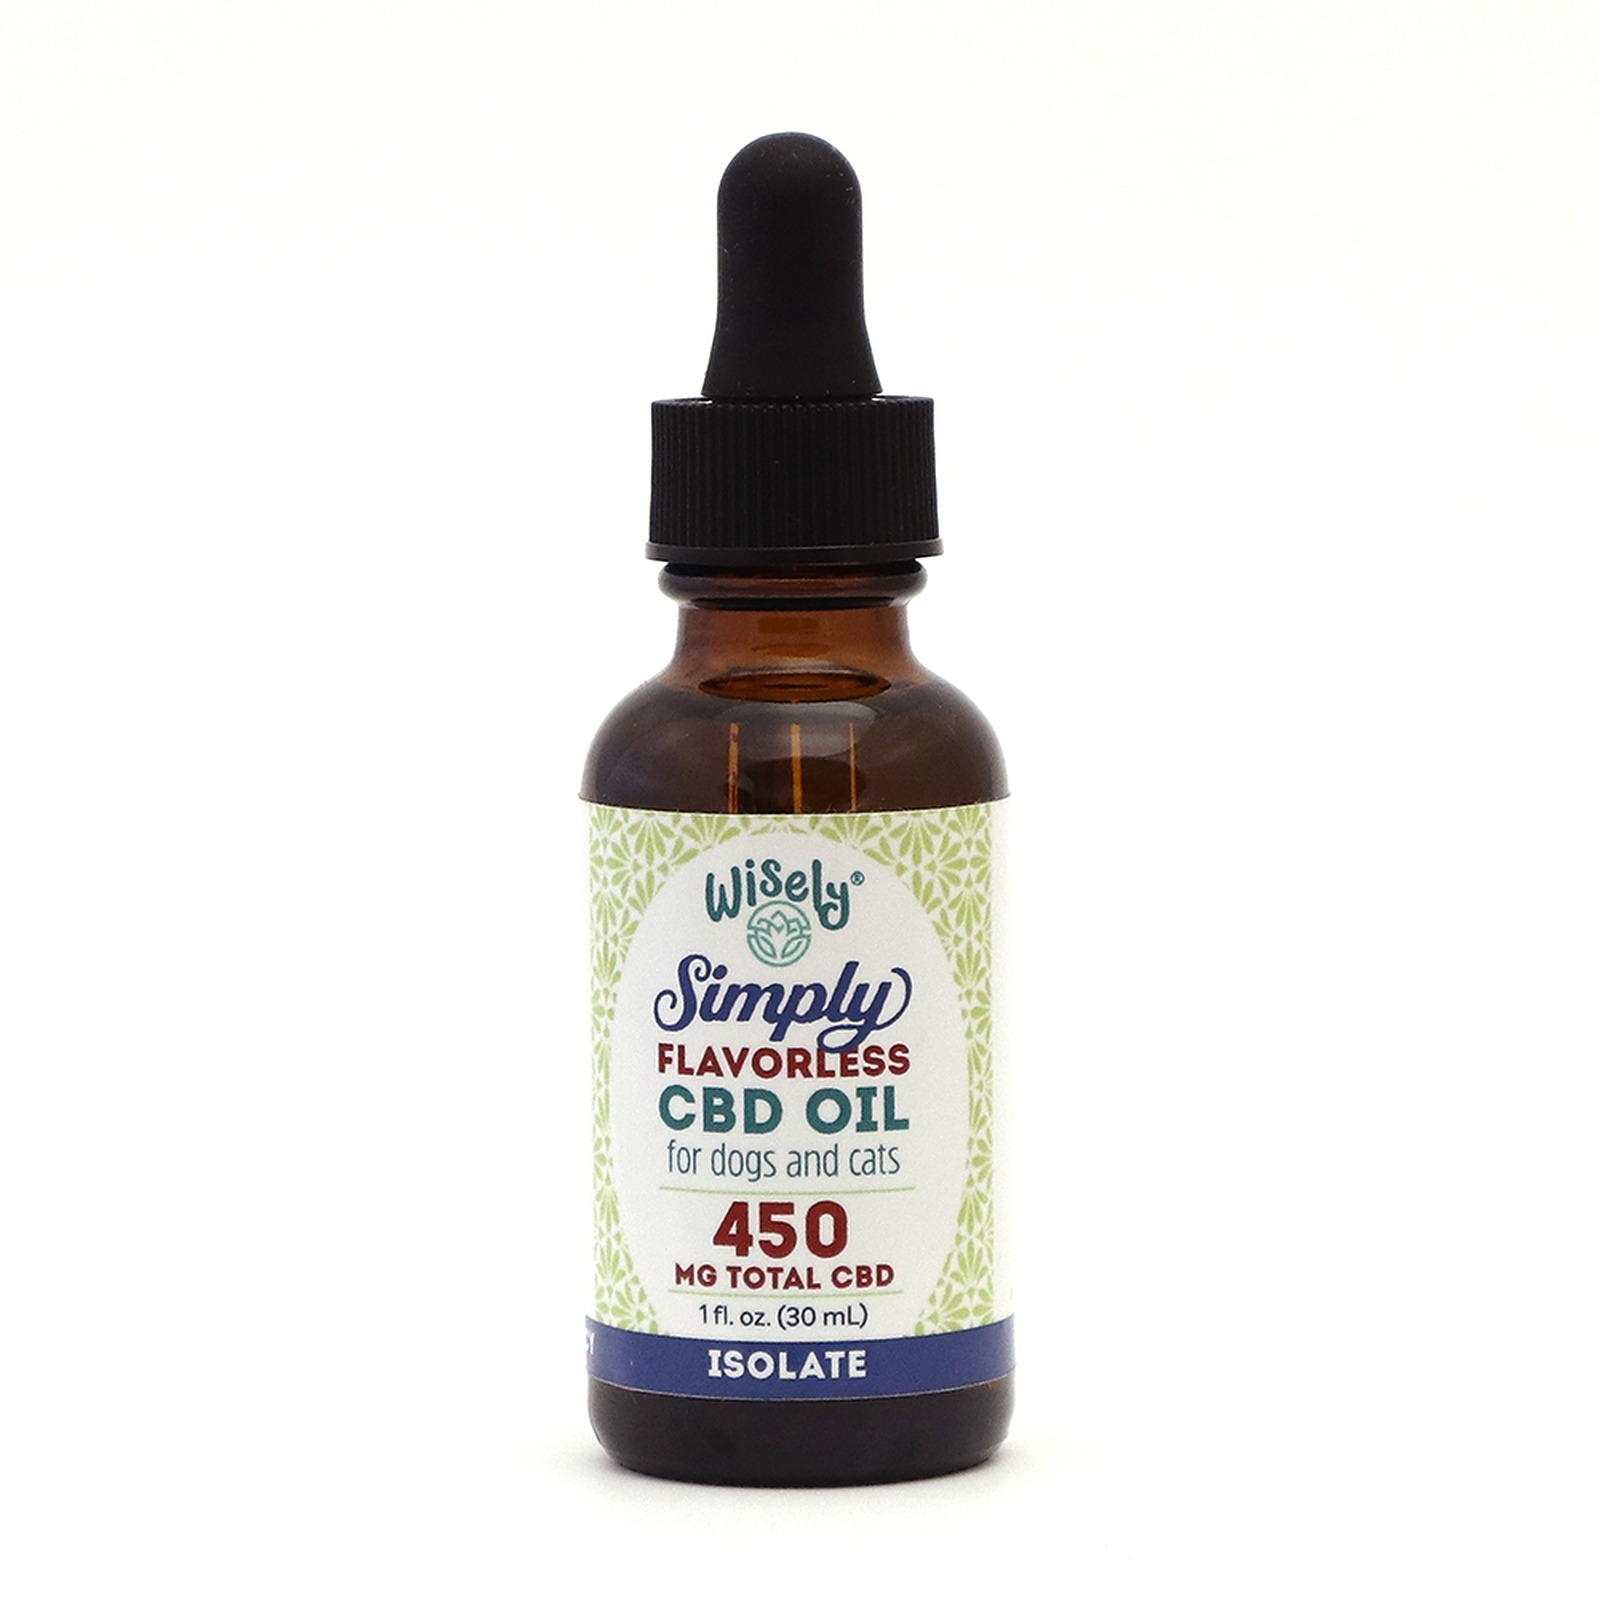 Wisely Simply CBD Flavorless Drops